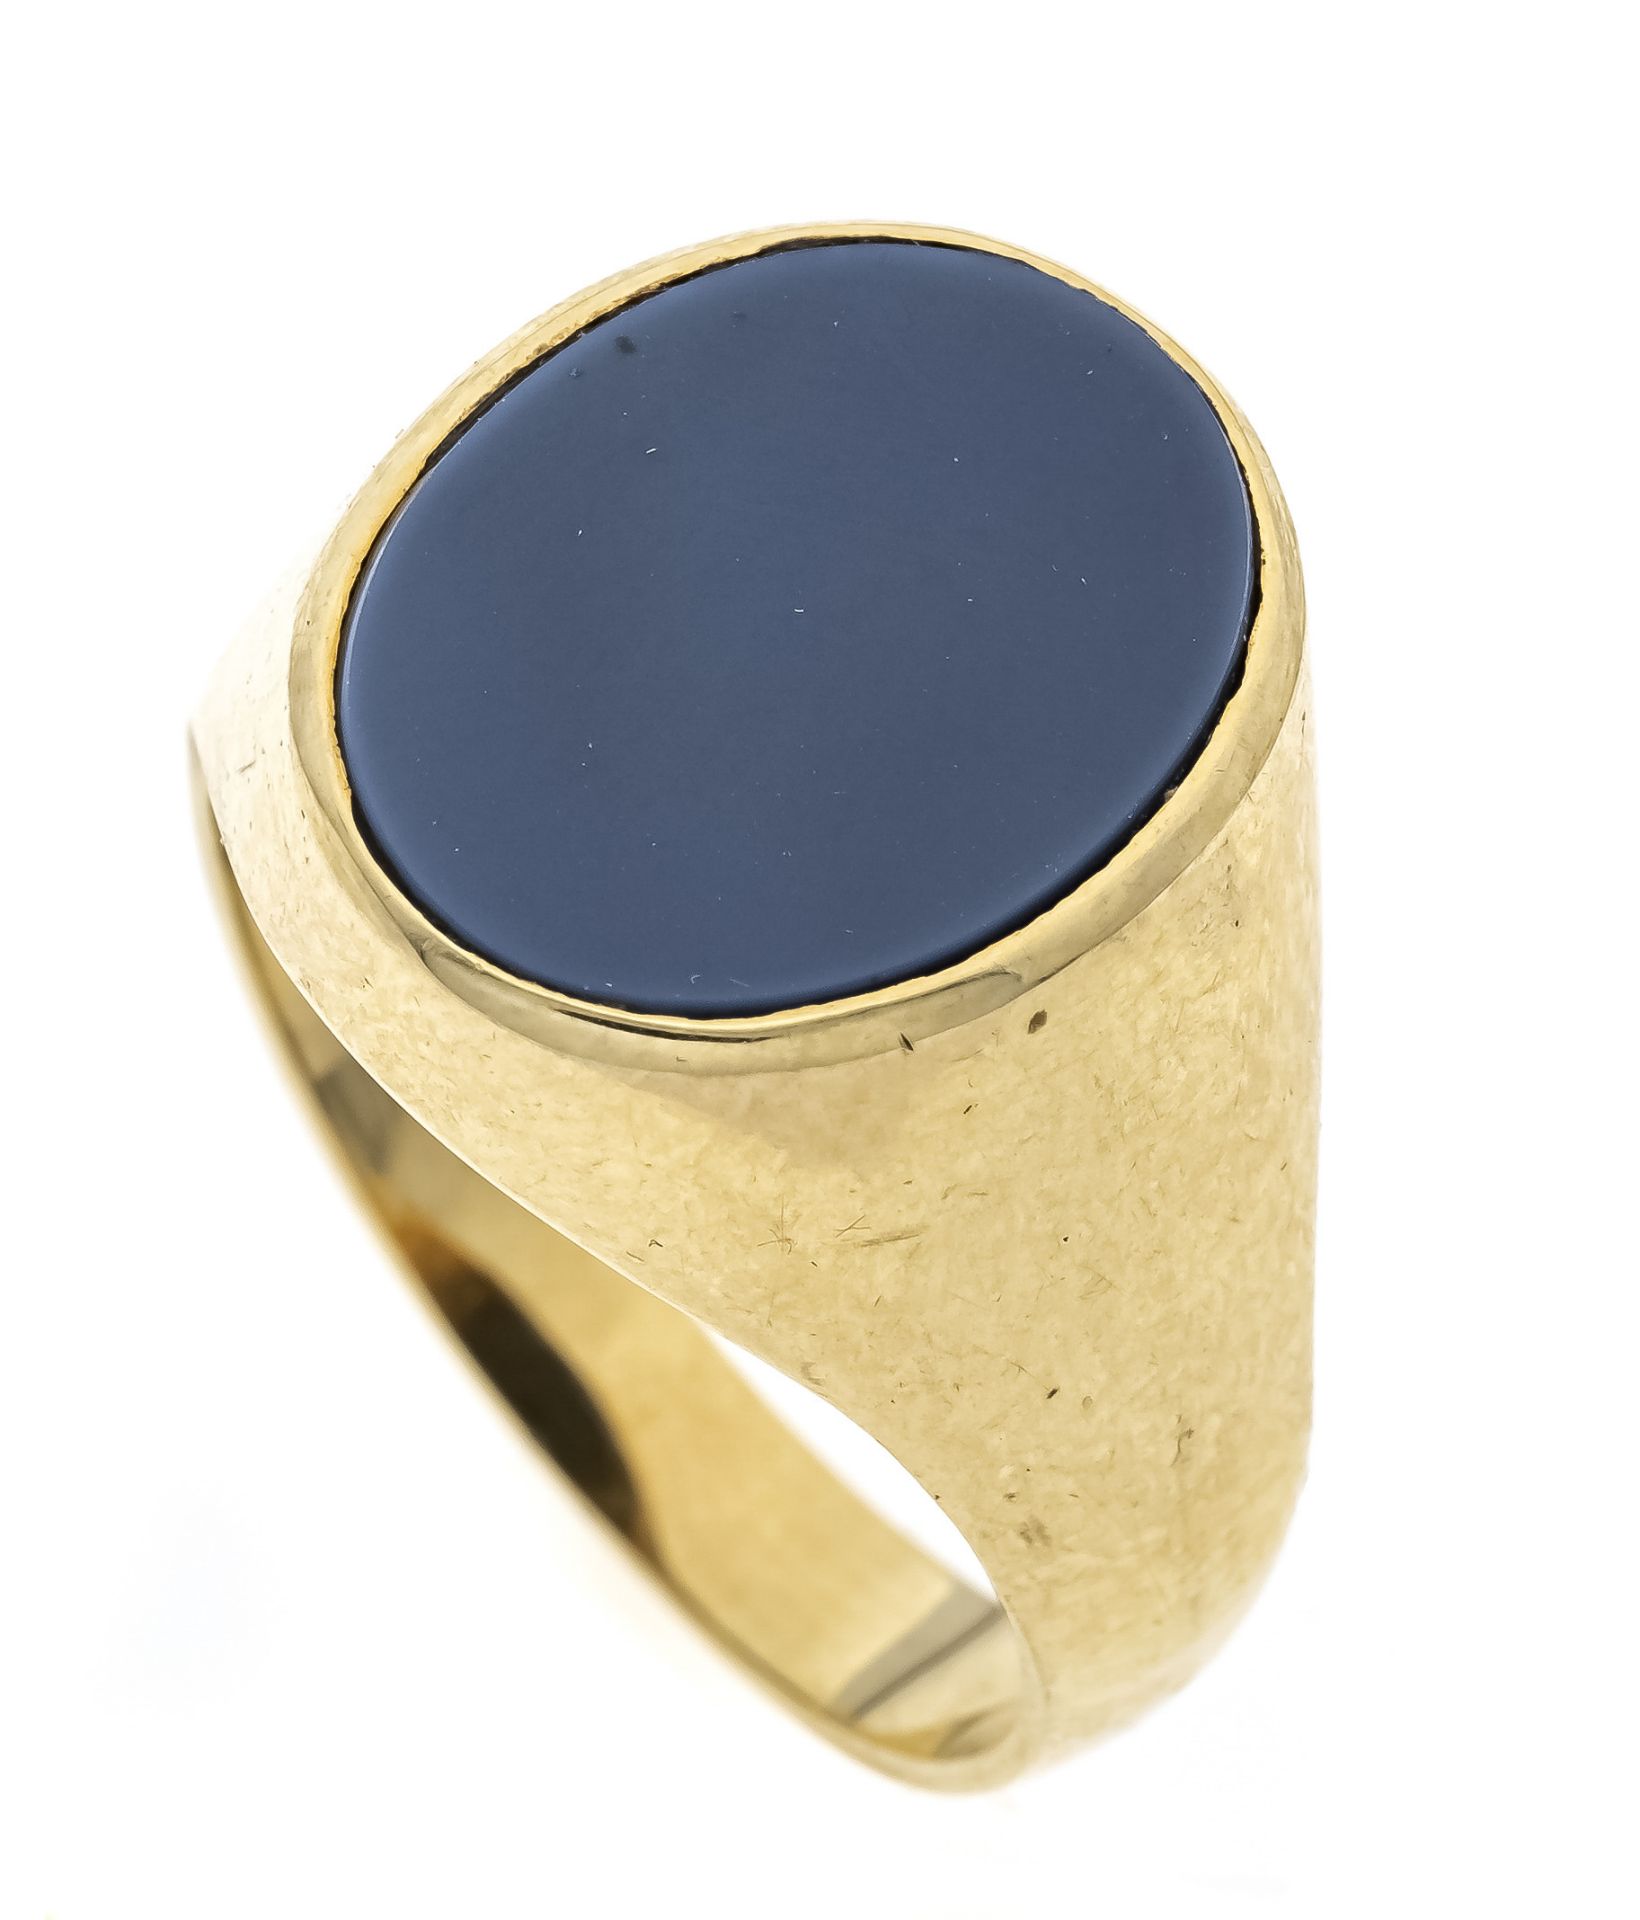 Ring for men made of GG 585/000 with an oval laystone 16 x 12 mm, RG 63, W hallmarked, 8.6 g